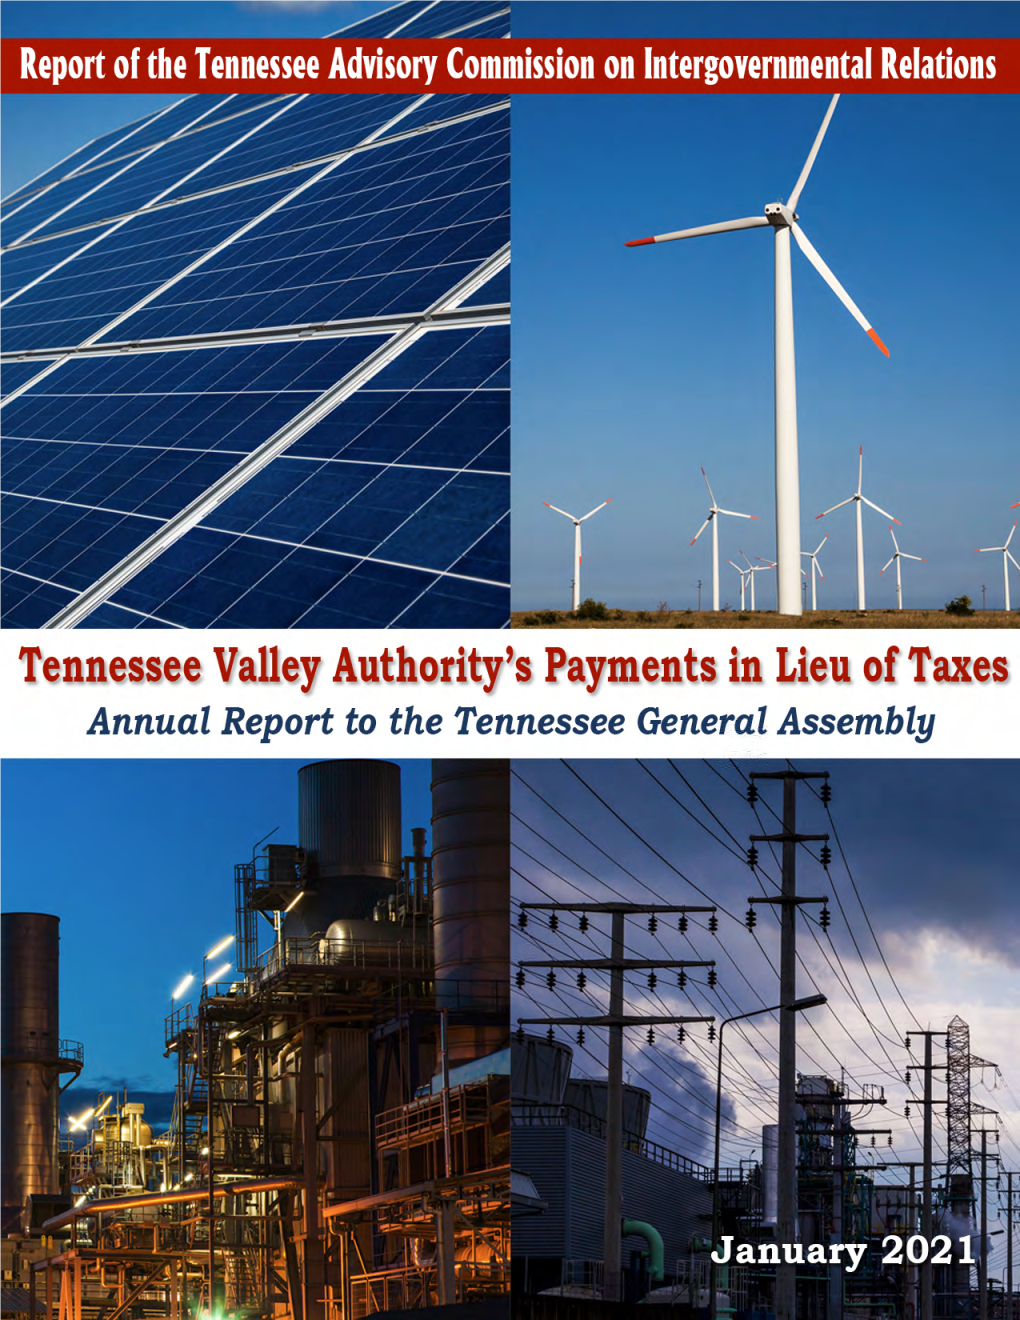 Tennessee Valley Authority's Payments in Lieu of Taxes